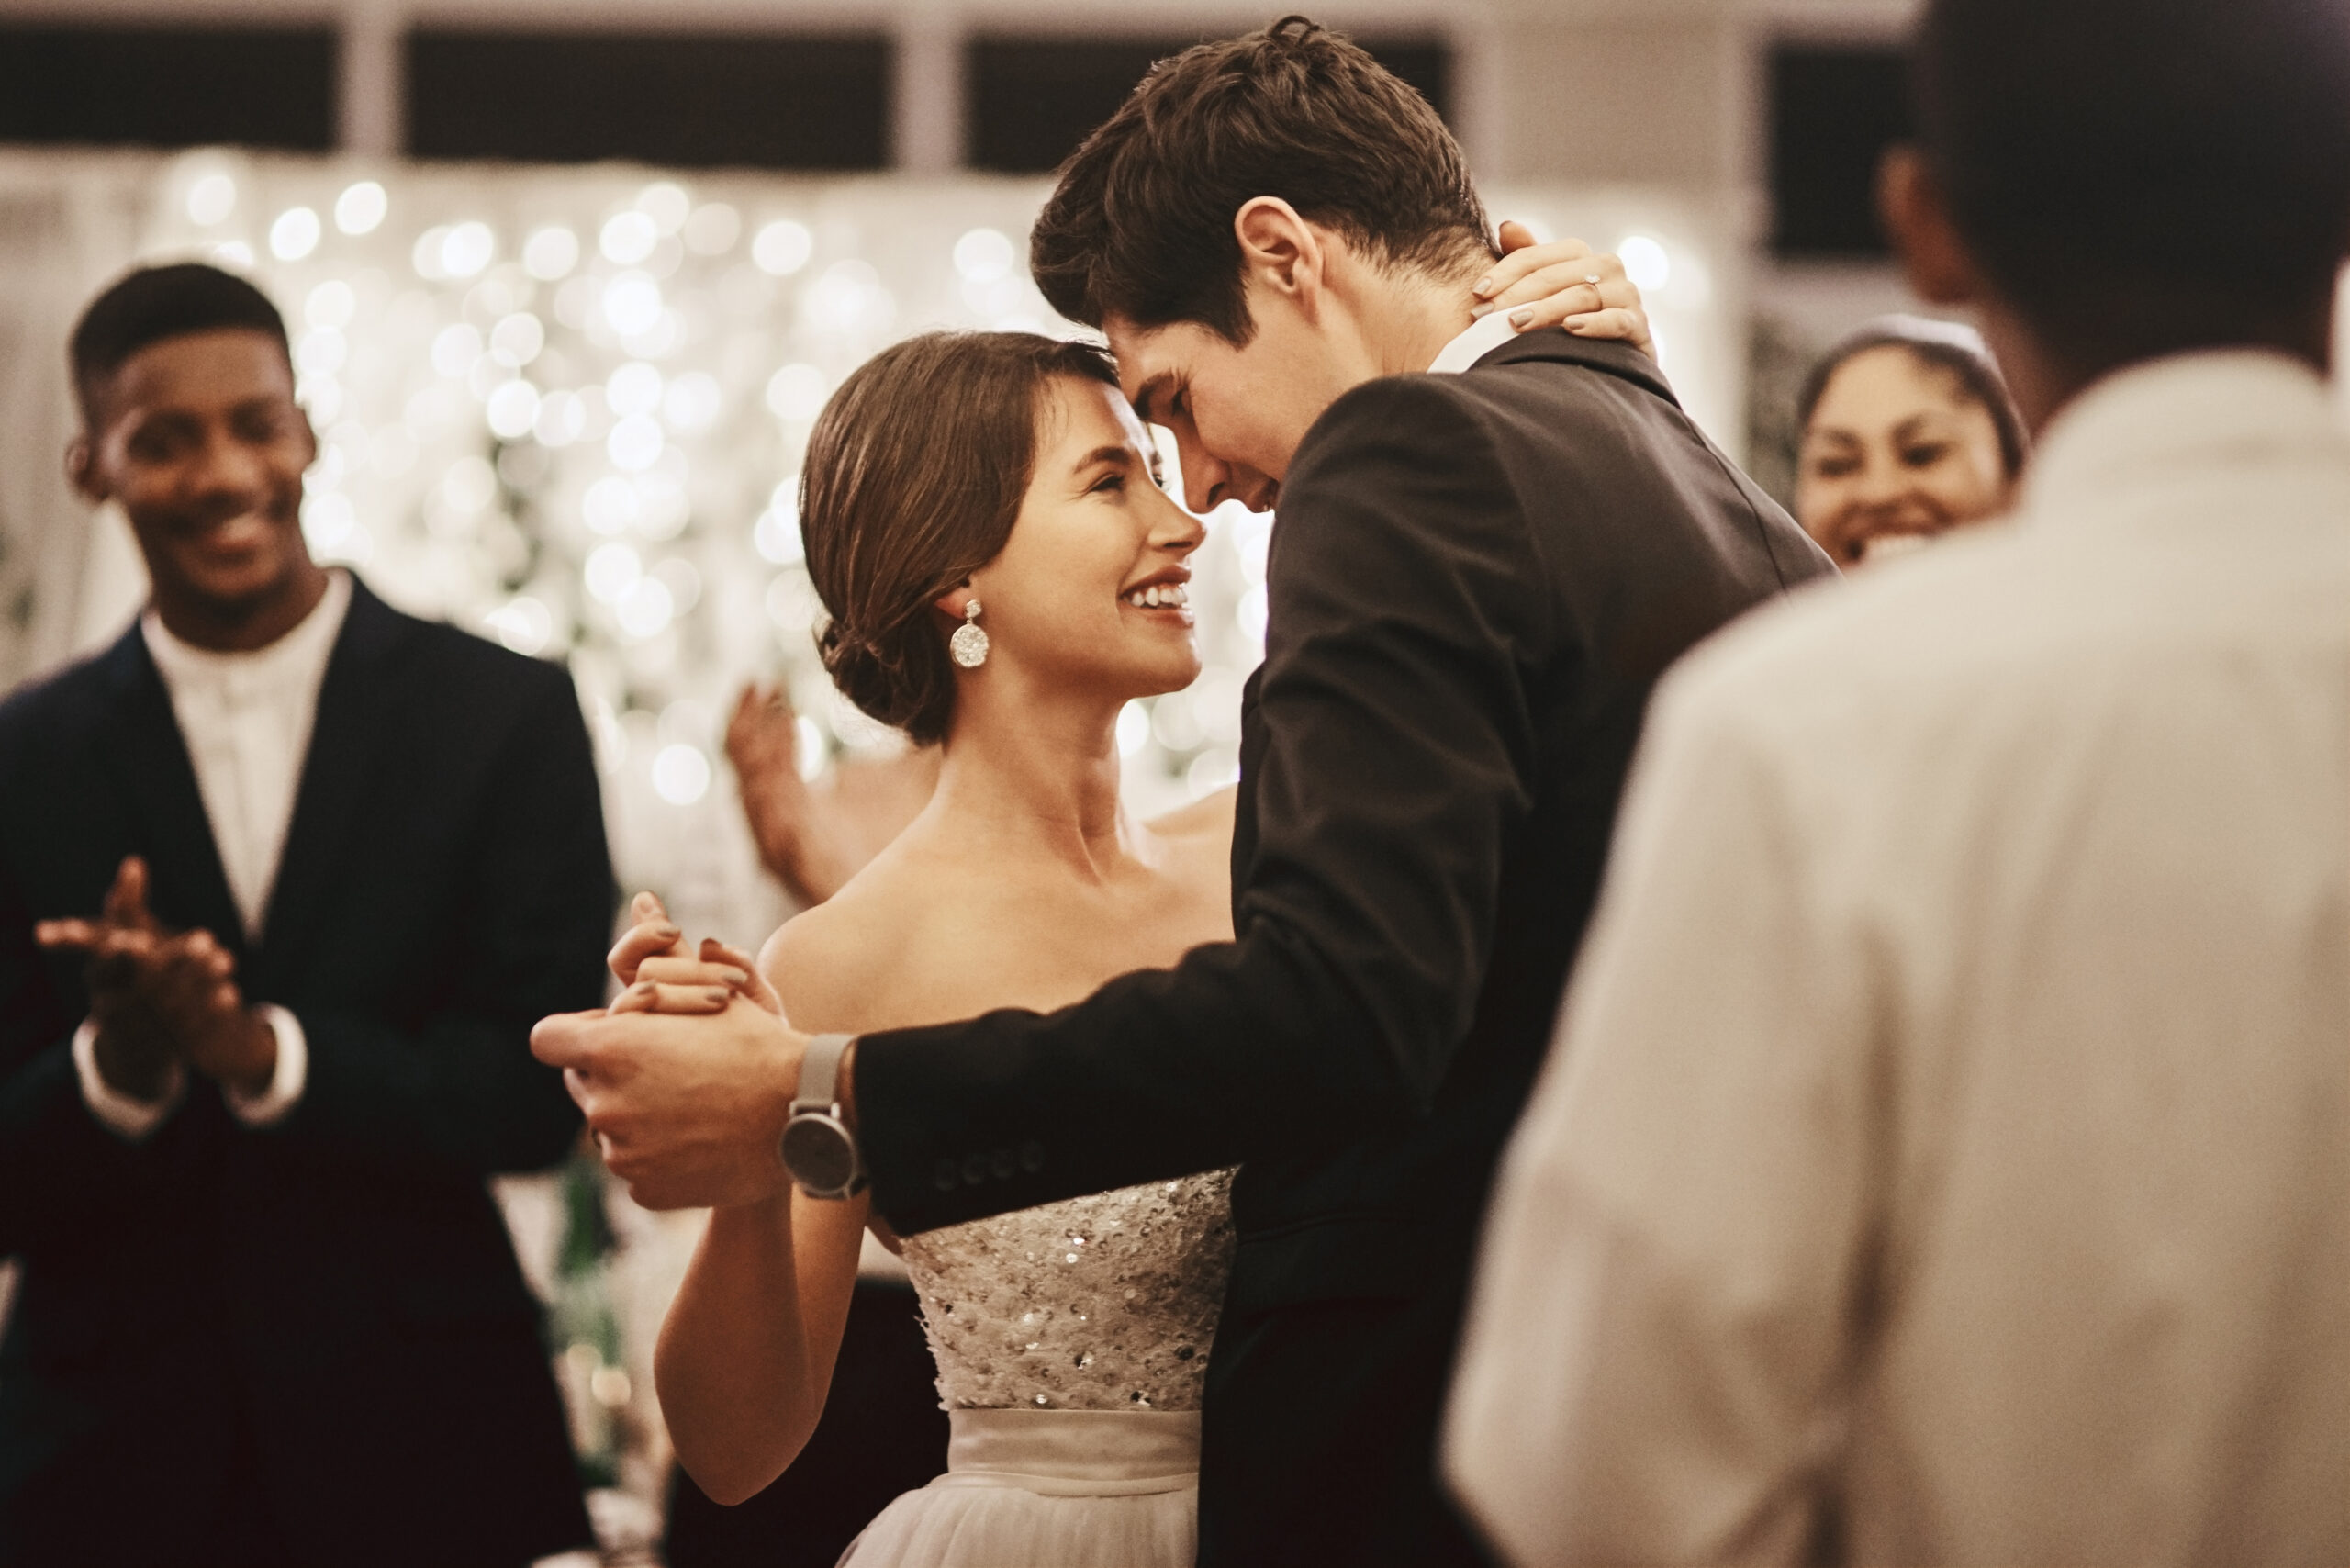 The benefits of wedding dance lessons